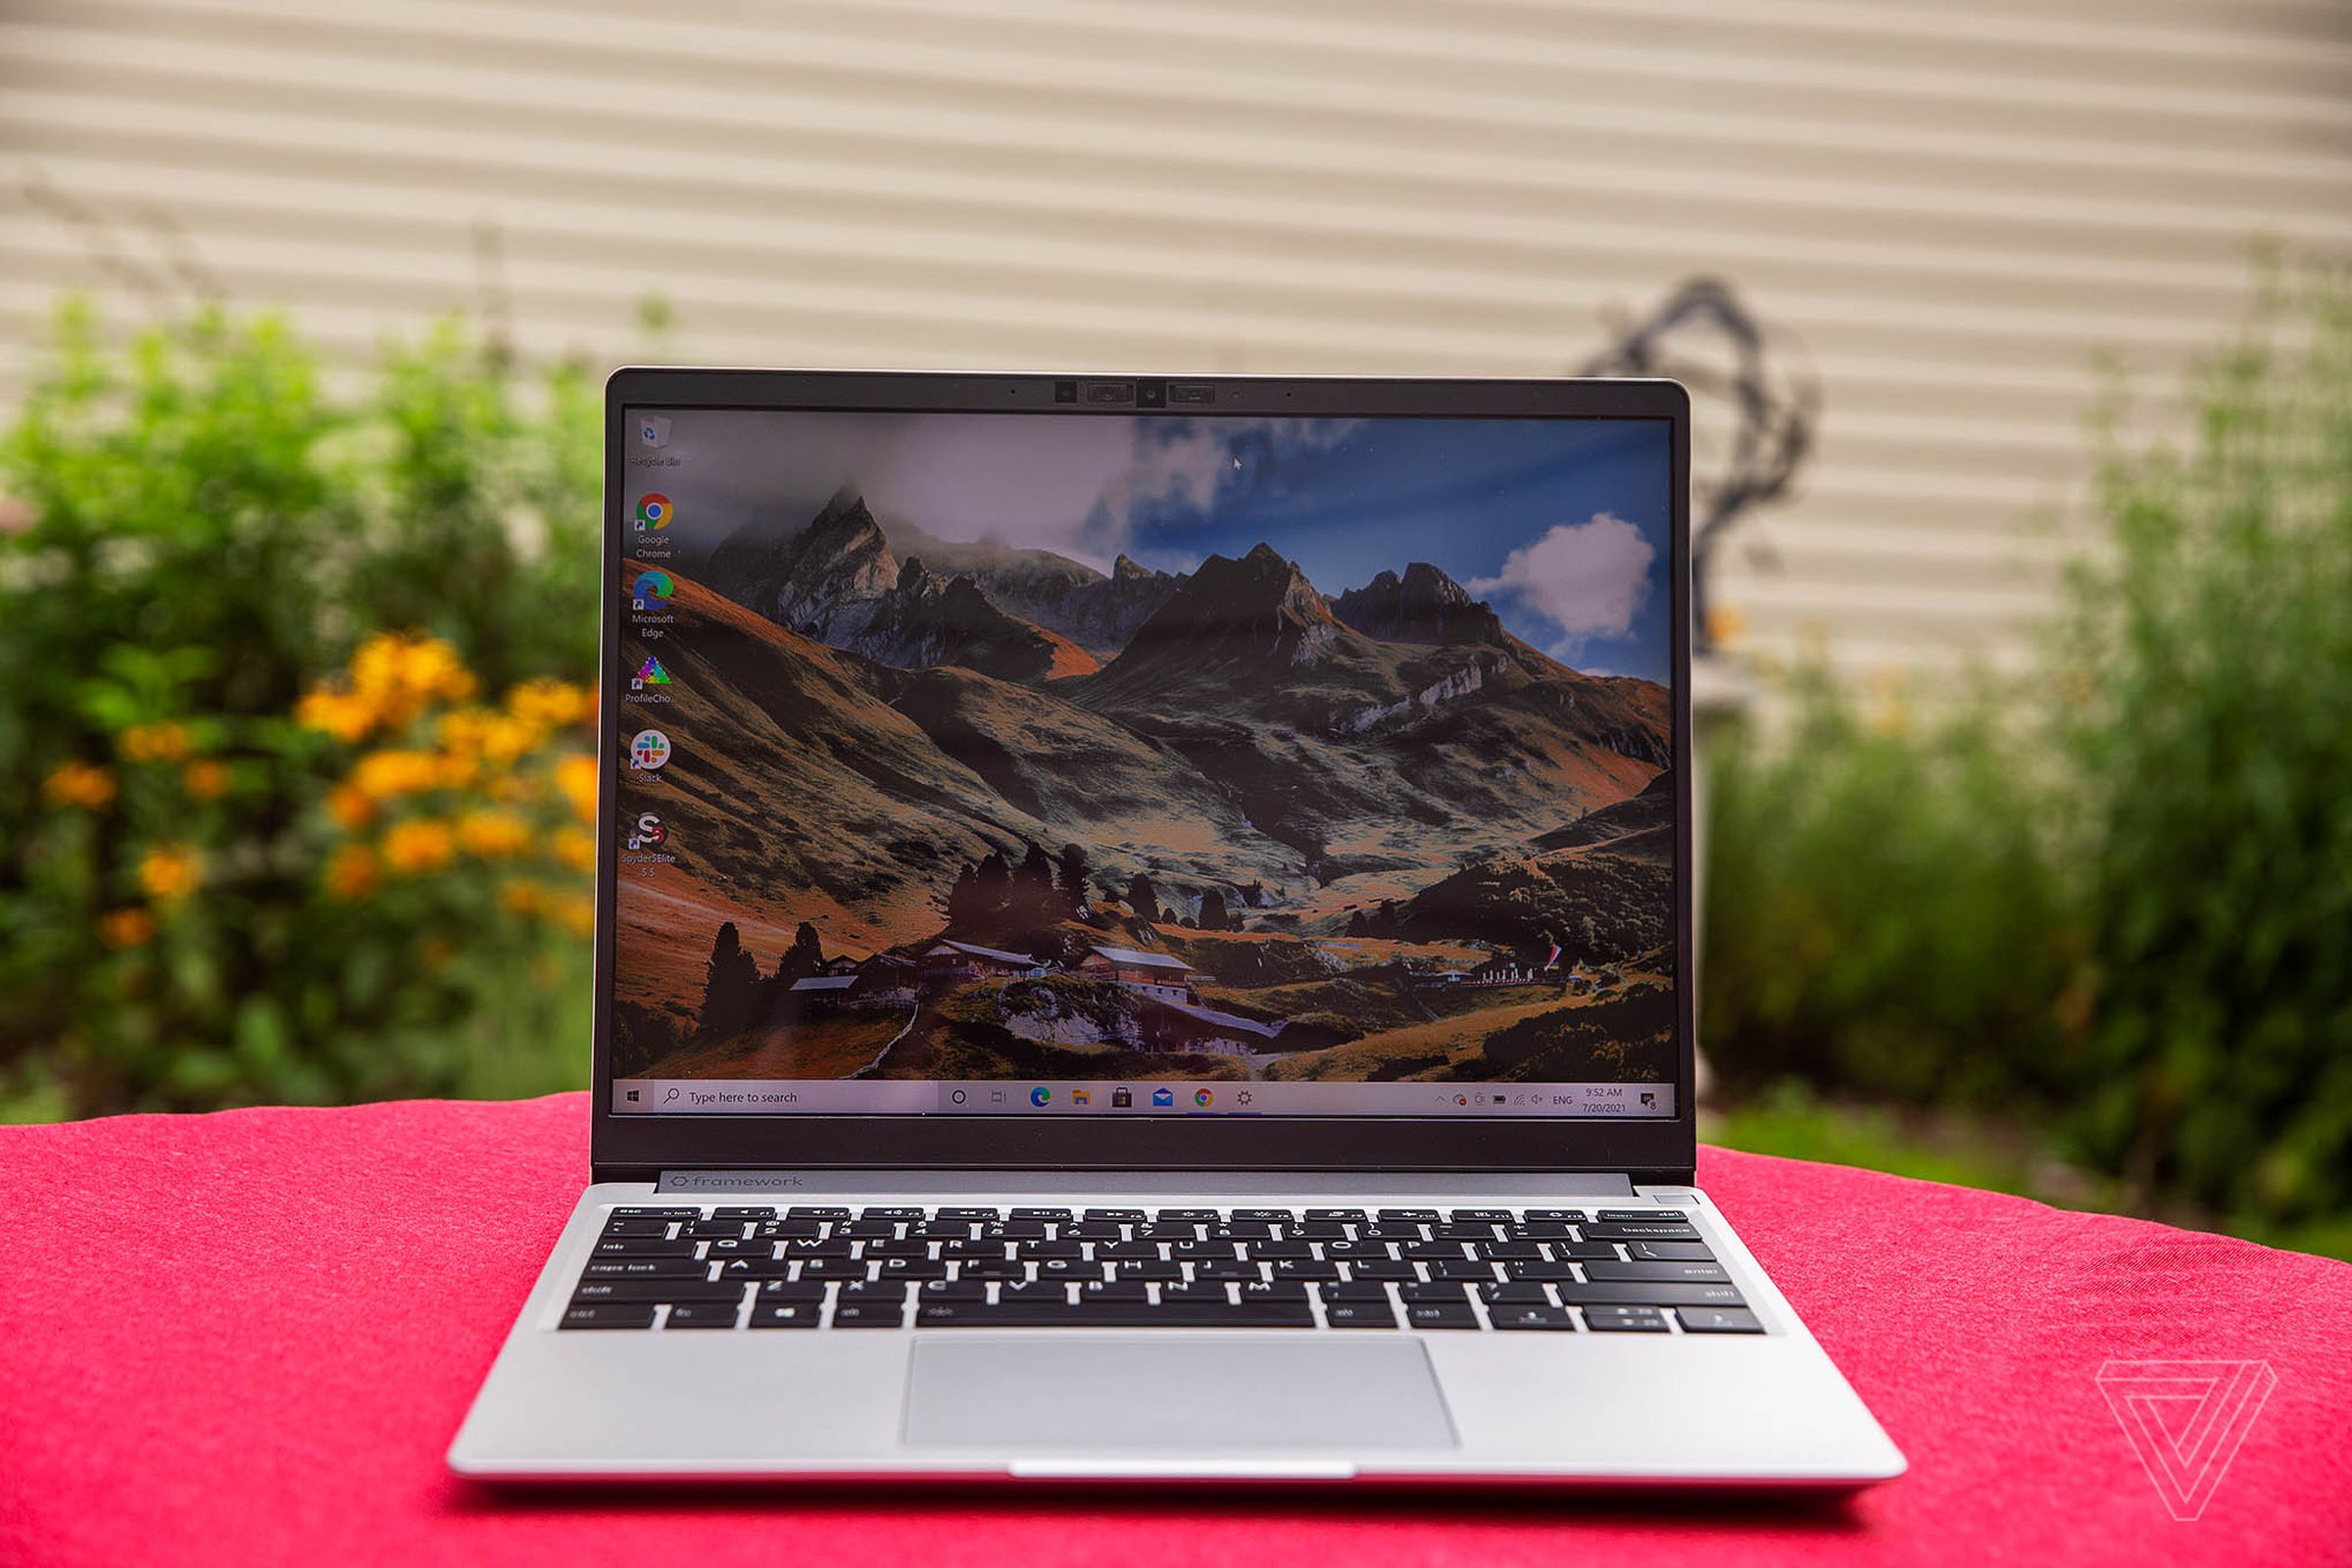 The Framework laptop open, outdoors, on a red tablecloth with a garden and the wall of a house in the background. The screen displays a mountainous landscape.